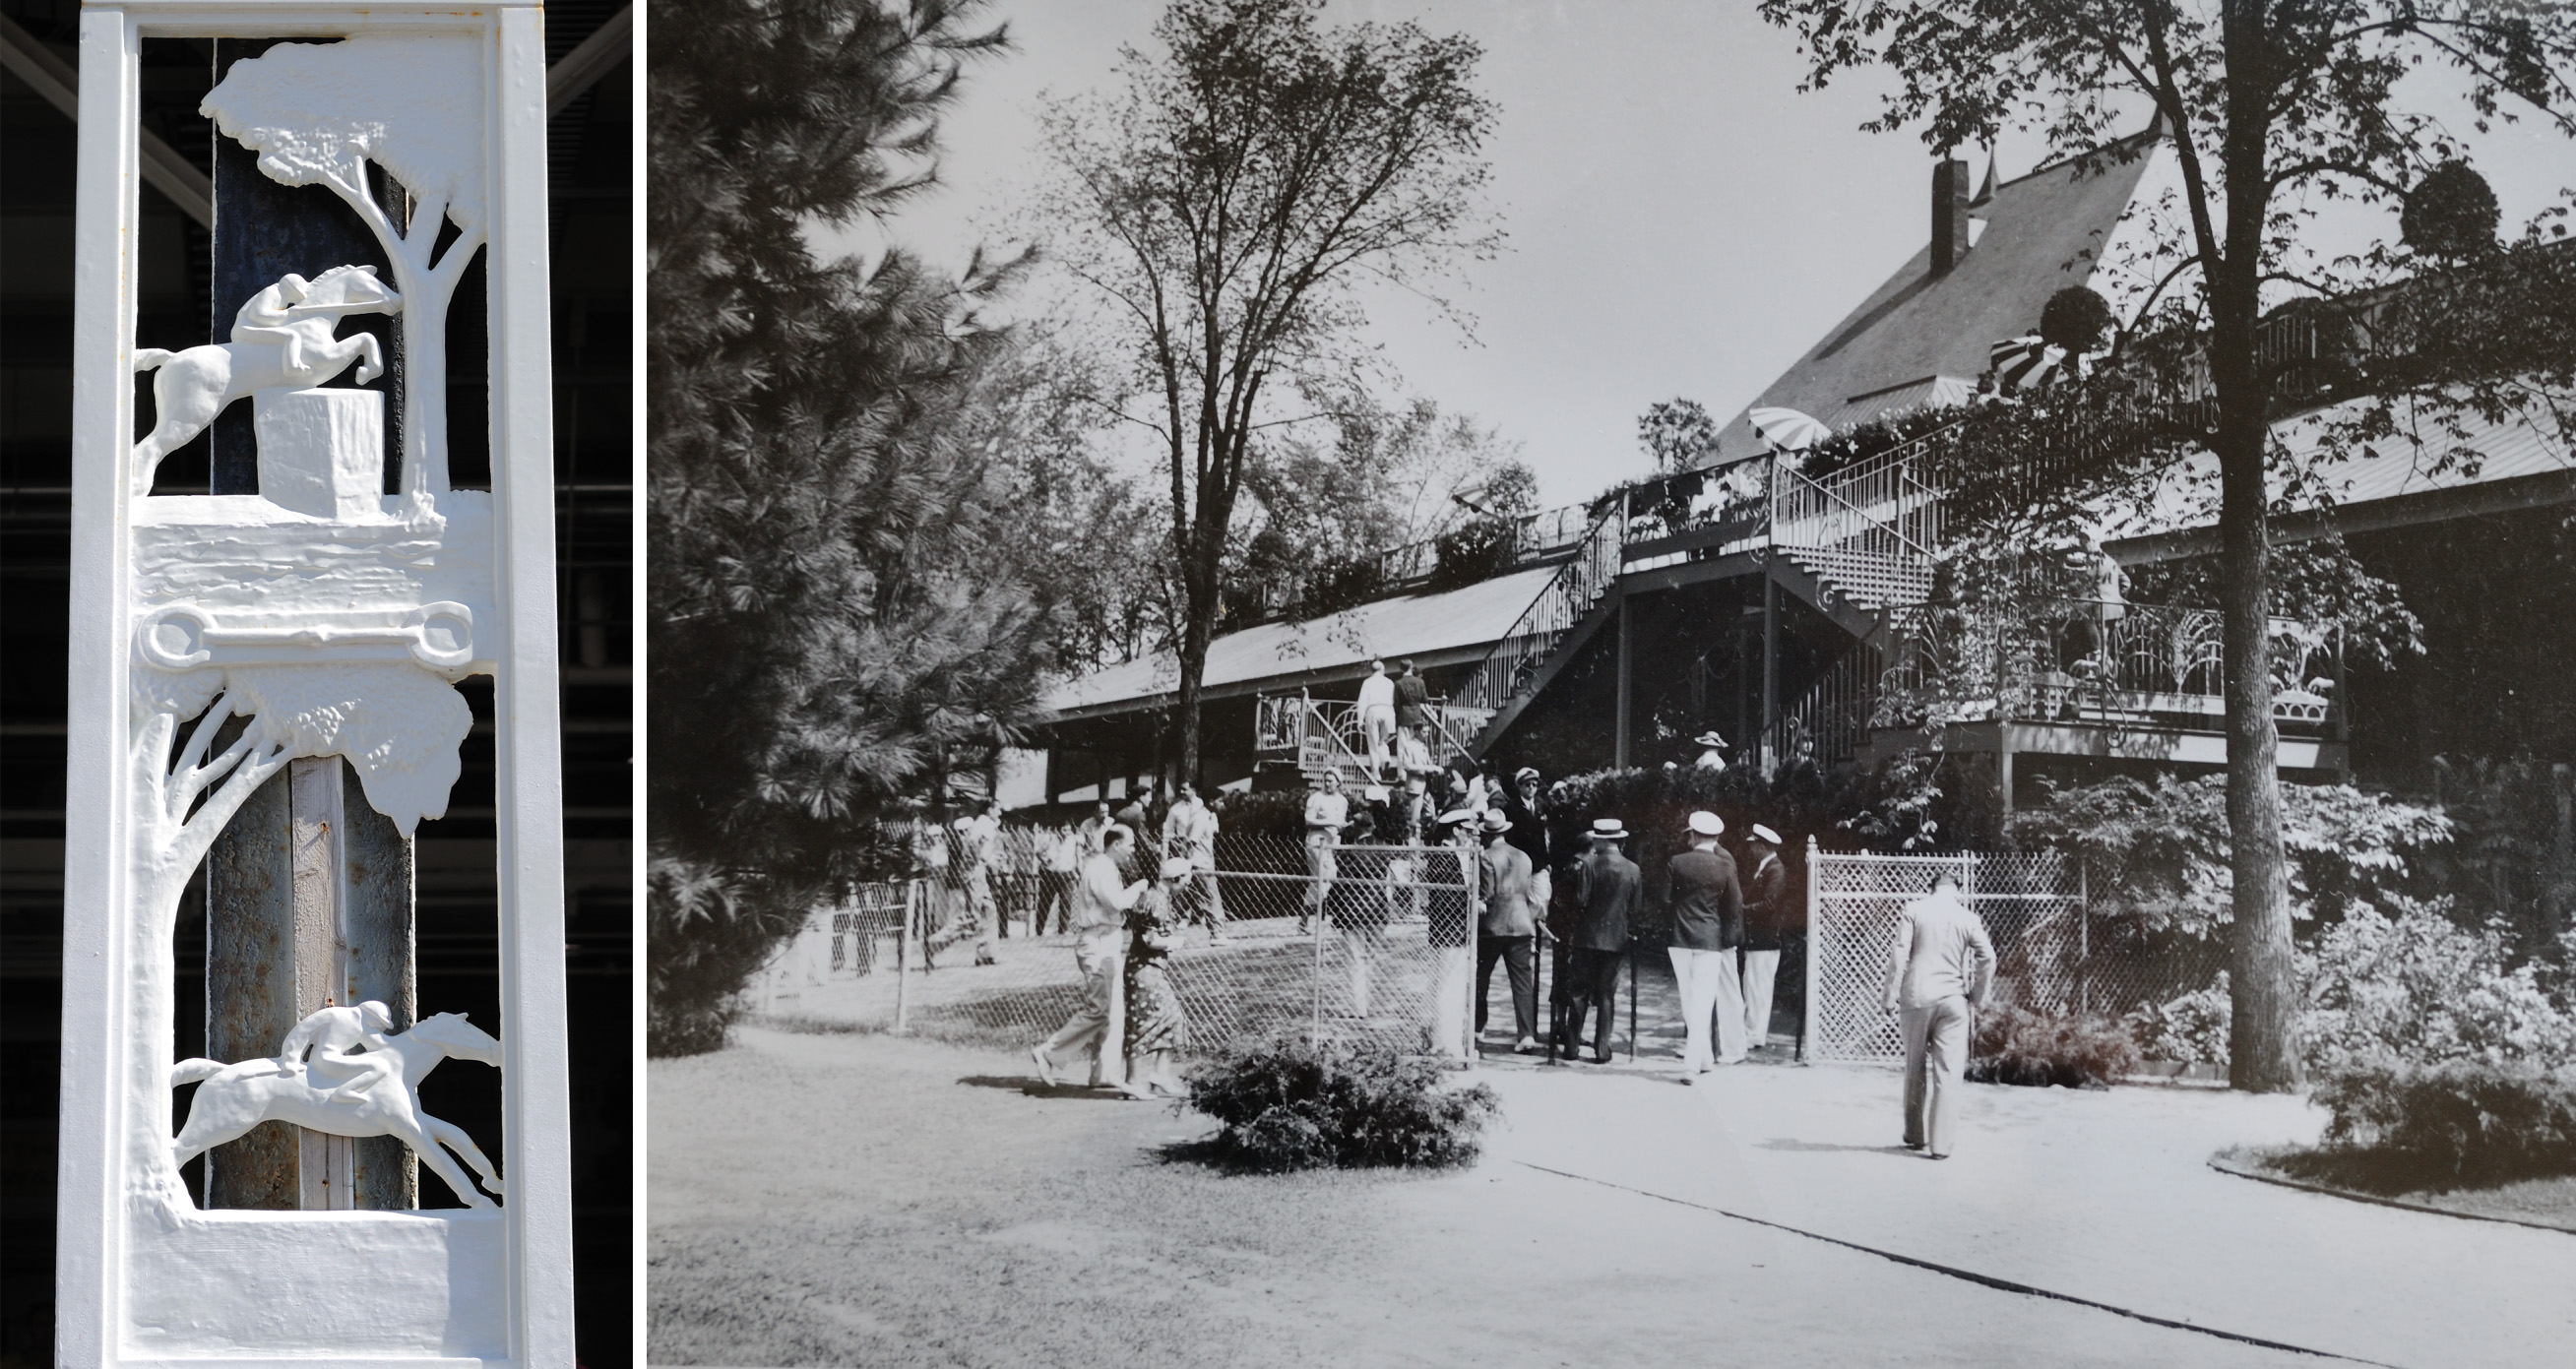 The betting ring, viewed from the back yard and the cast-iron decoration that it introduced. The image on the right is courtesy Saratoga Springs History Museum